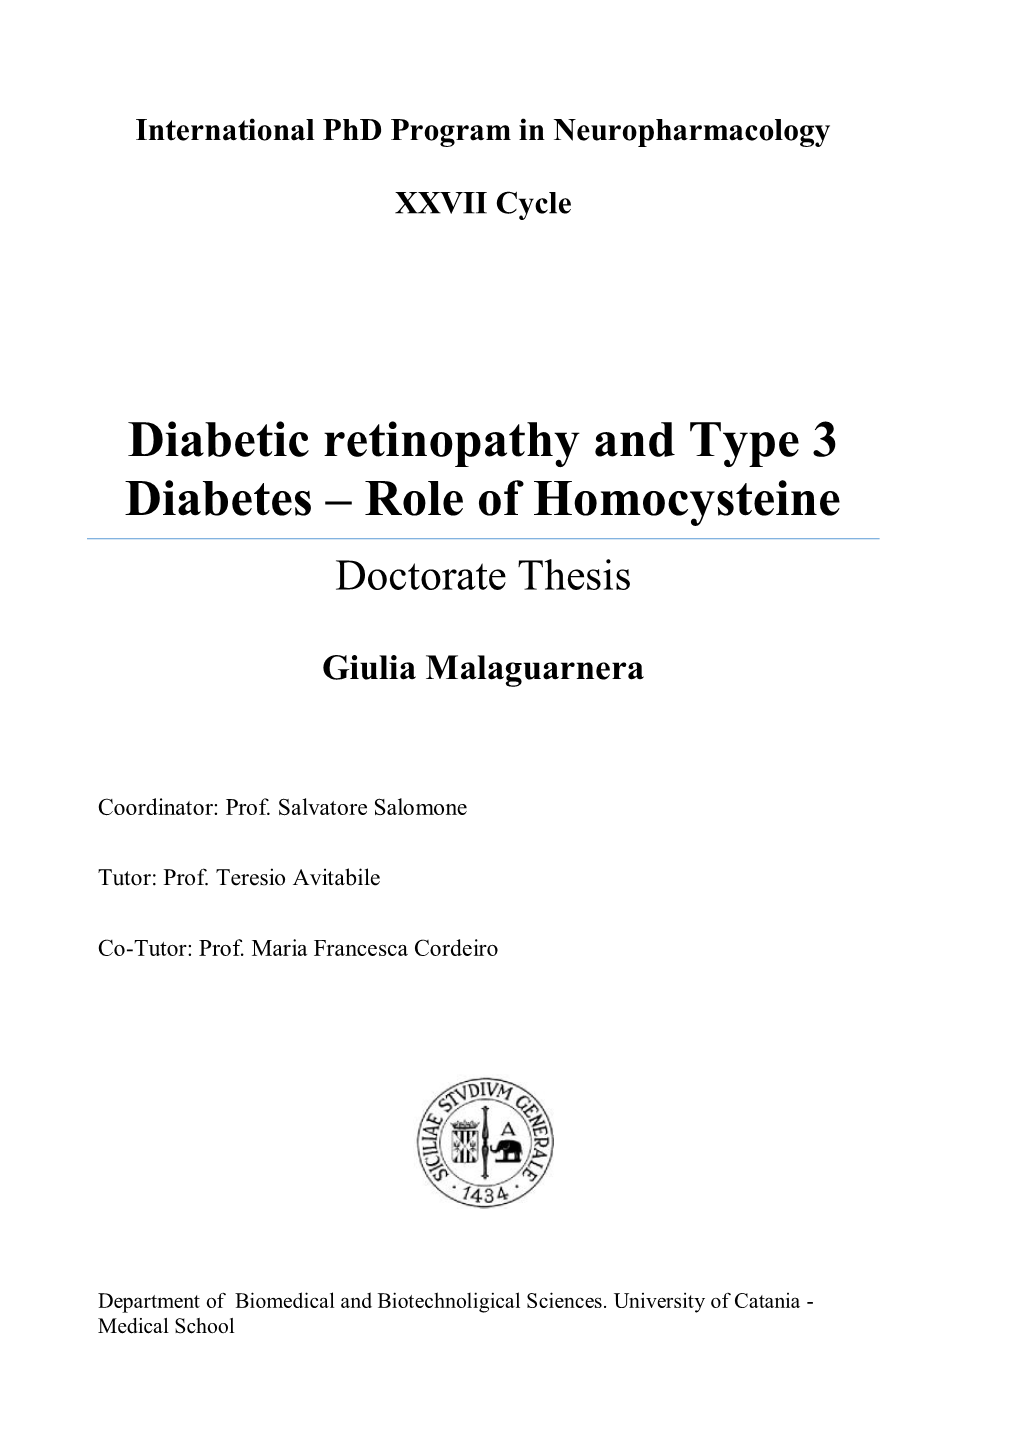 Diabetic Retinopathy and Type 3 Diabetes – Role of Homocysteine Doctorate Thesis